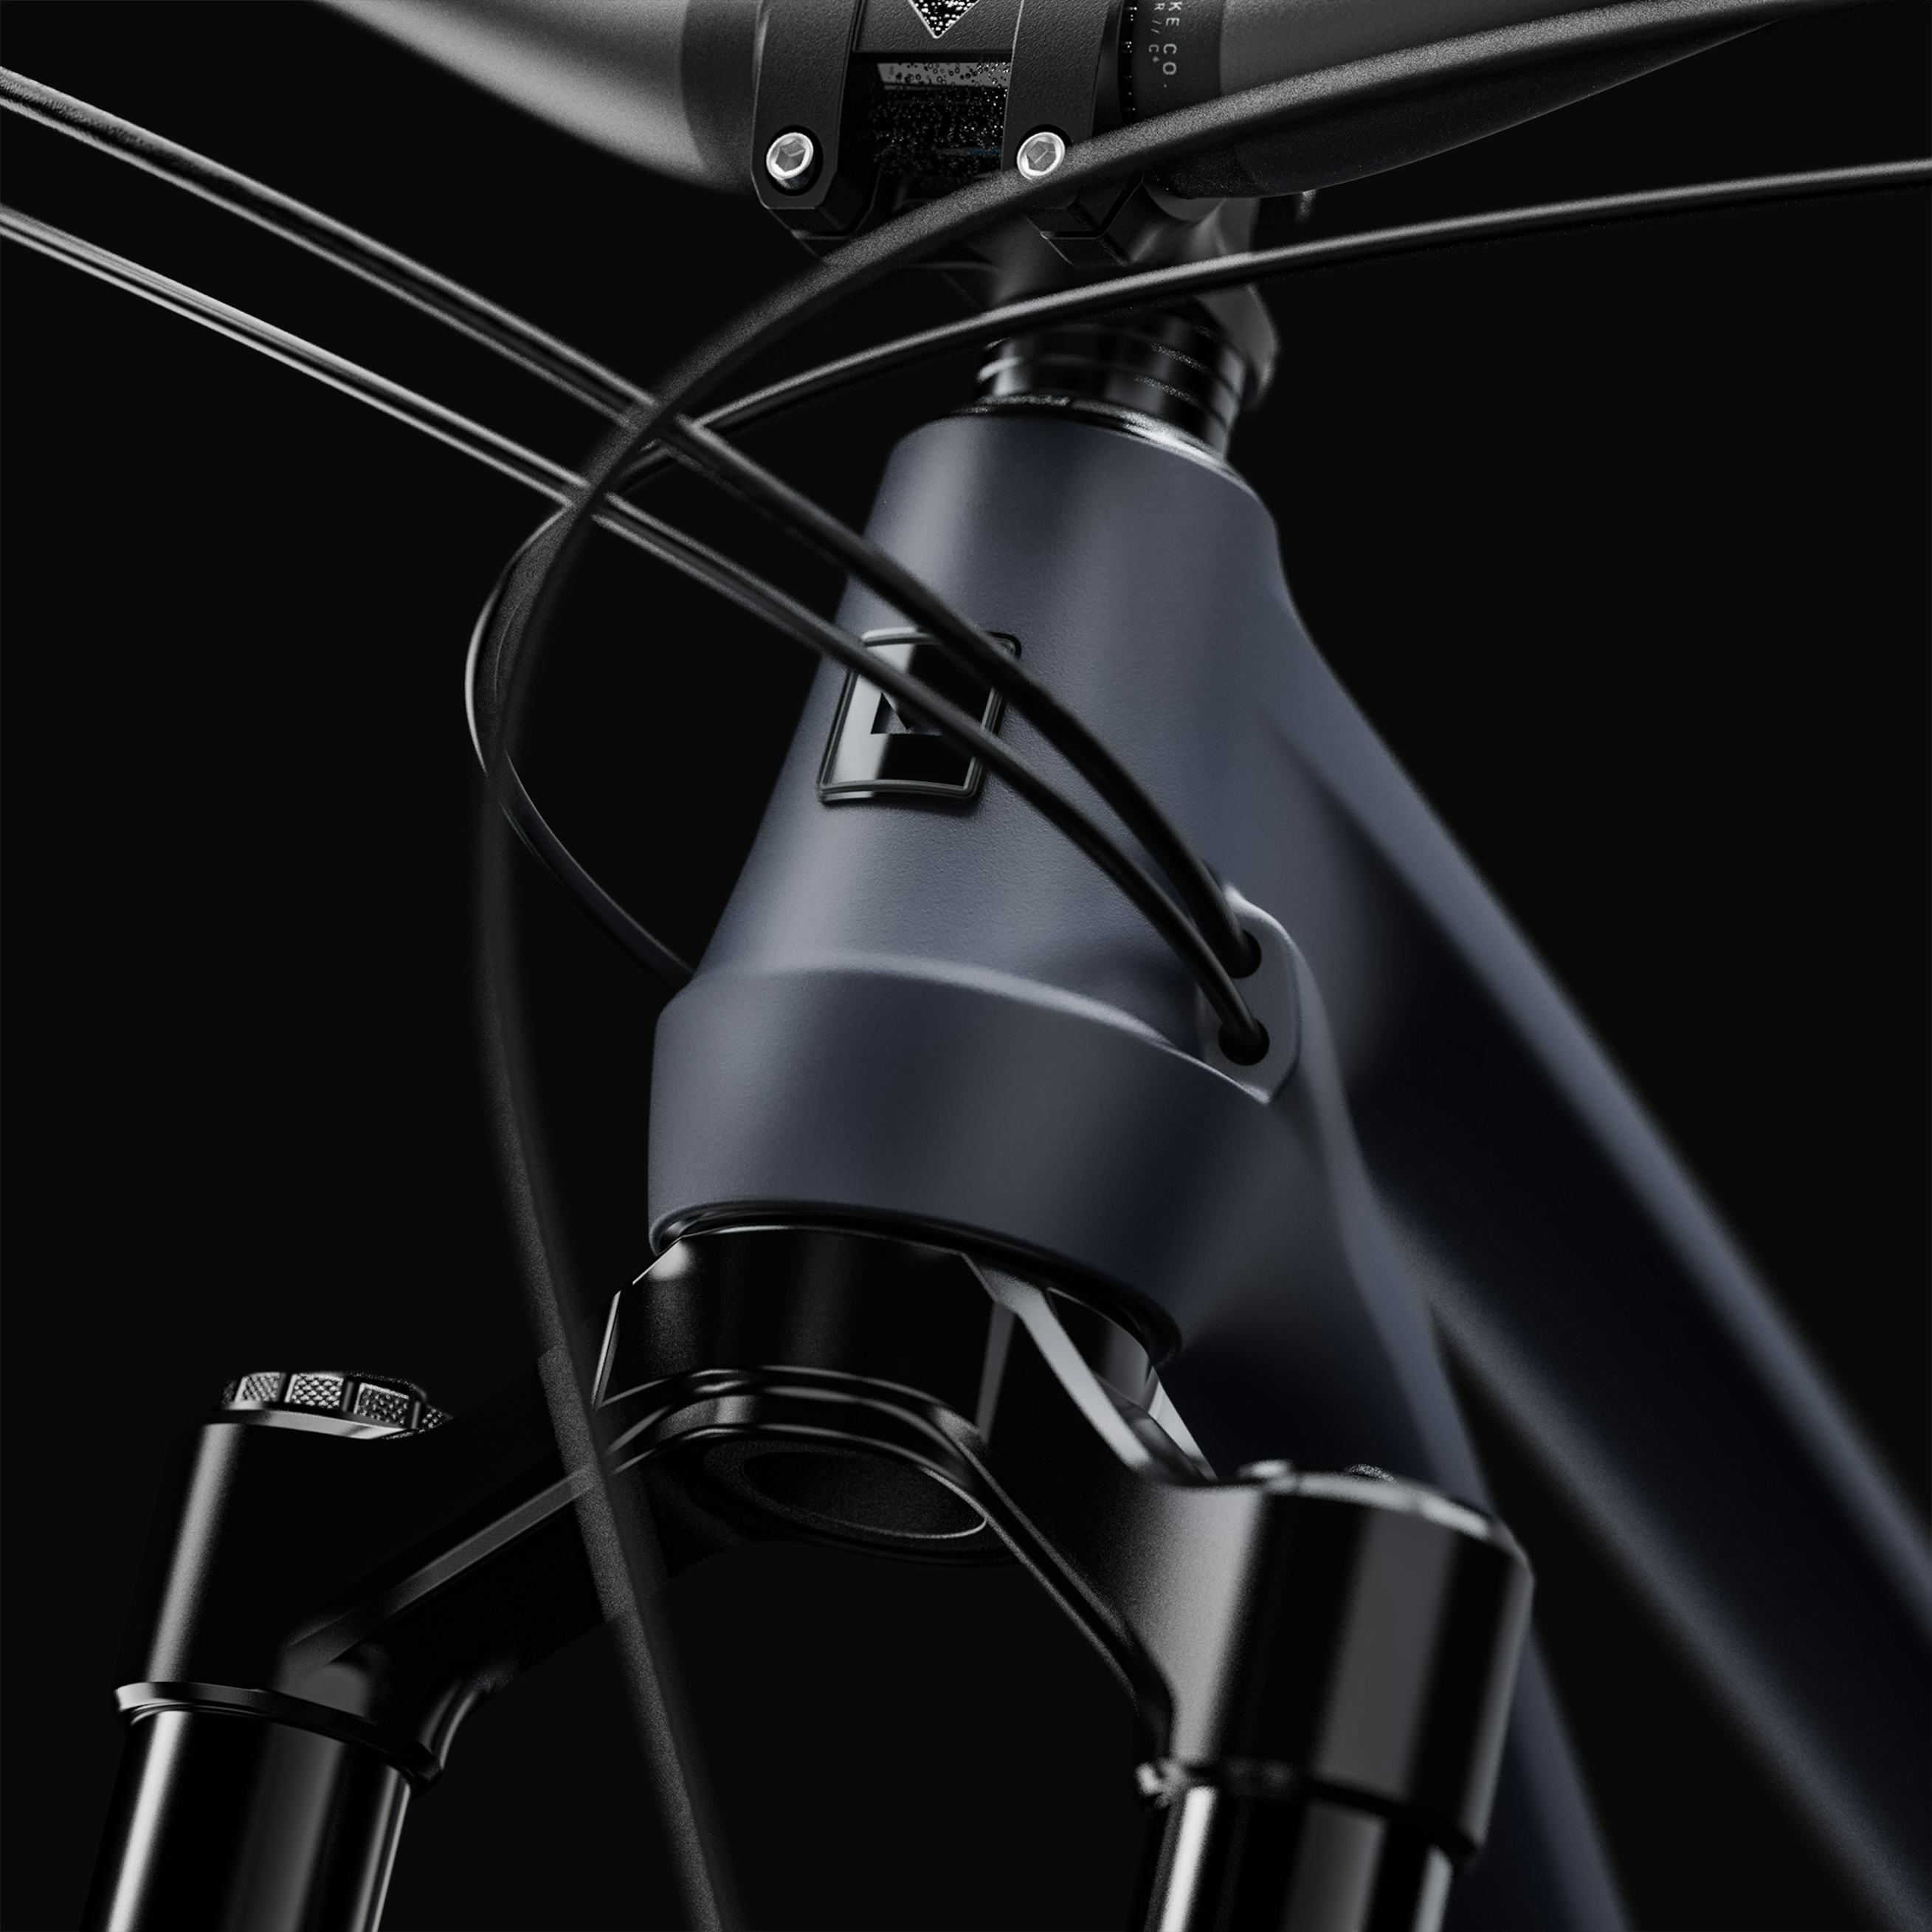 Insurgent Ls internal cable routing